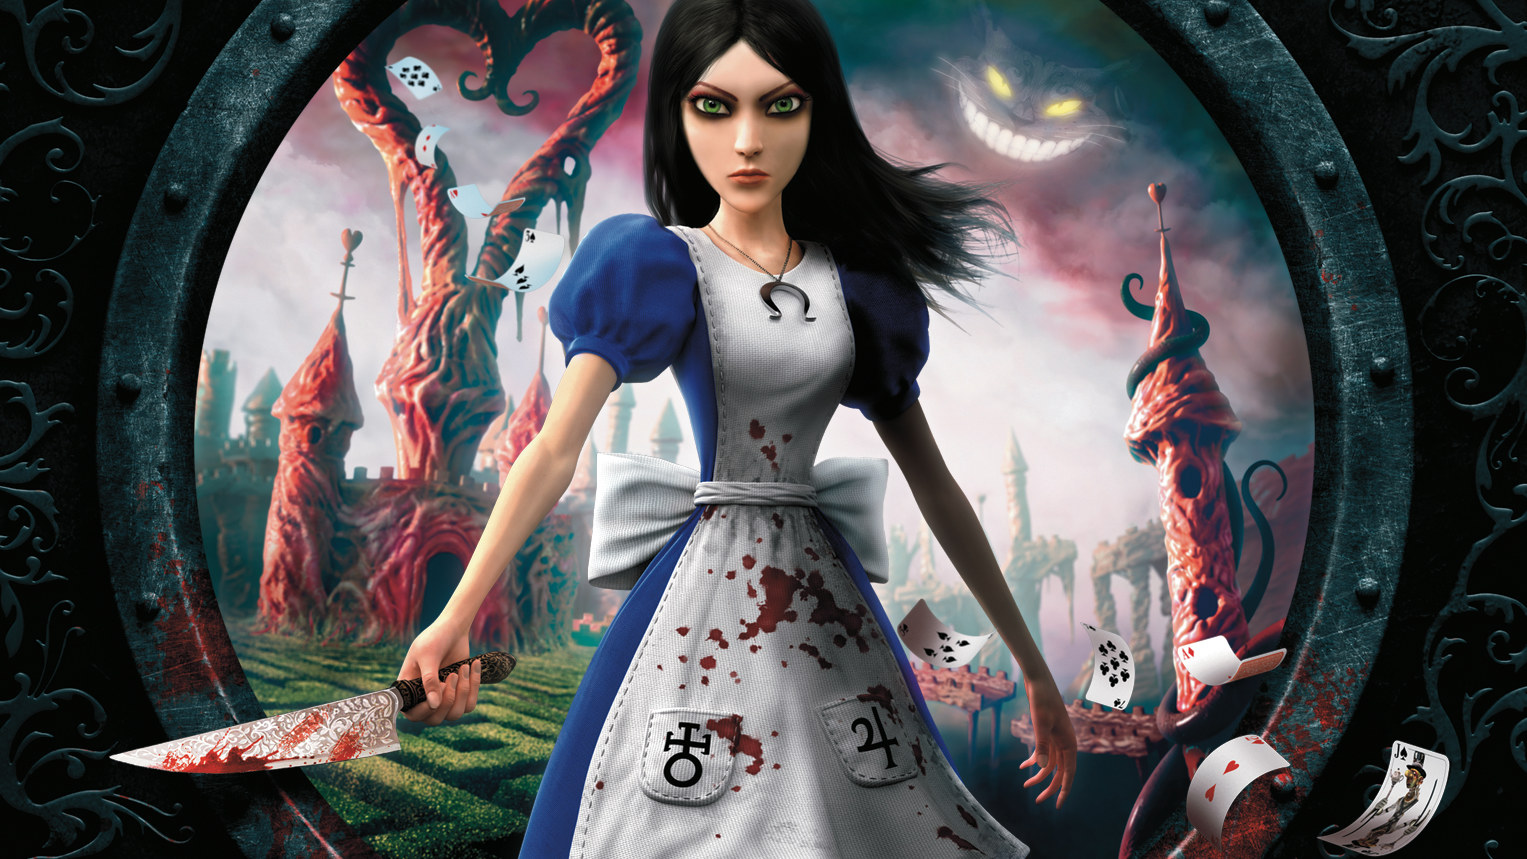 american mcgee alice full game